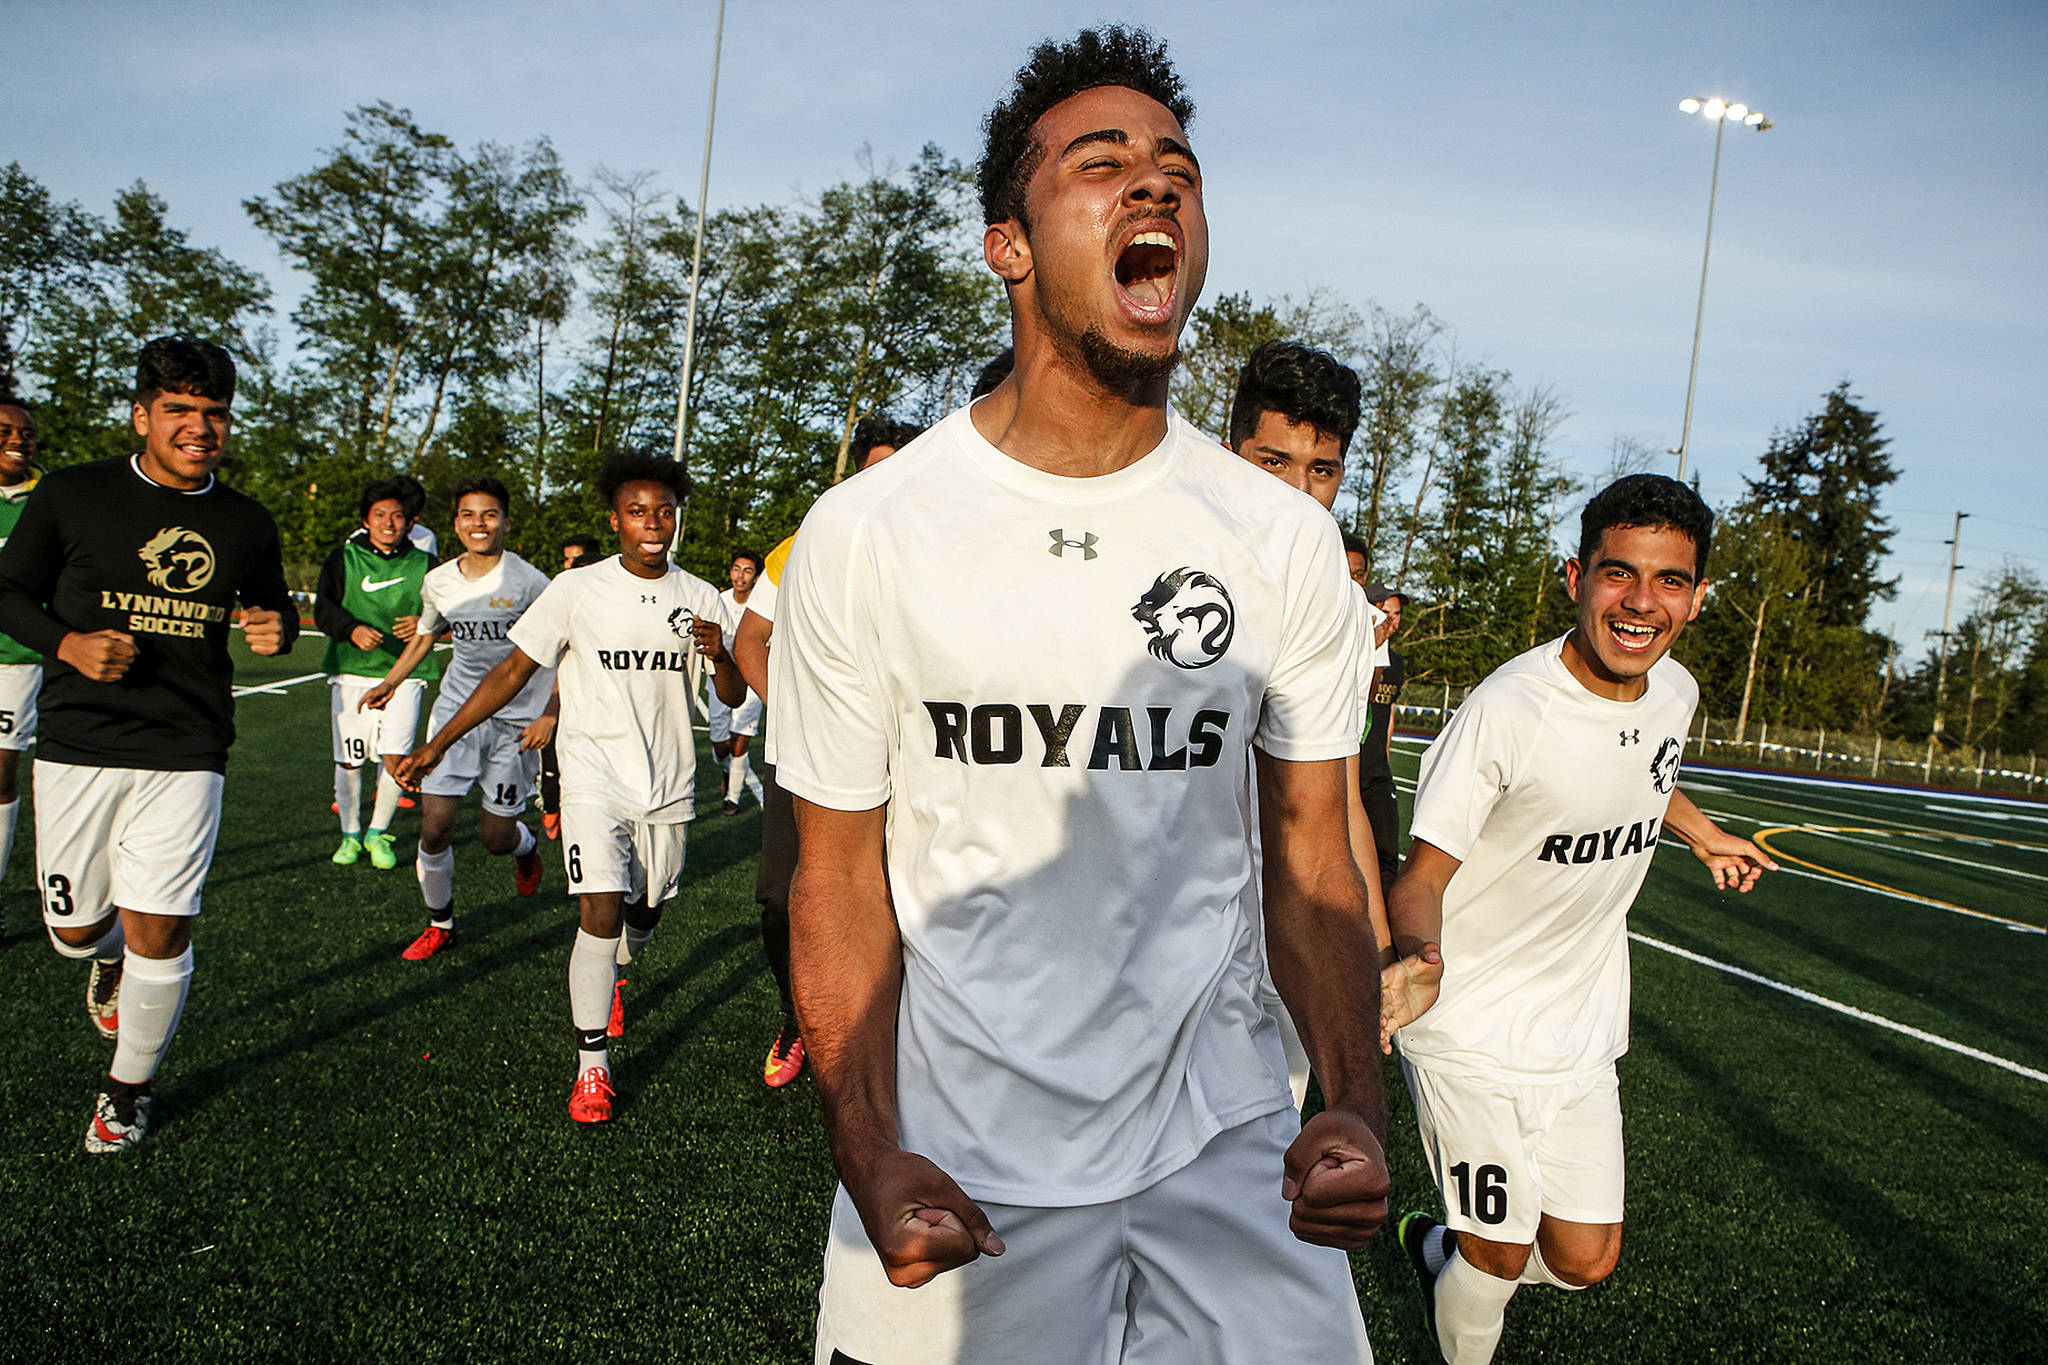 Lynnwood’s Ryley Johnson celebrates a 2-1 victory over Squalicum in a 3A District 1 Tournament semifinal game on May 9, 2017, at Shoreline Stadium. Johnson scored the go-ahead goal in the second half of the match. (Ian Terry / The Herald)